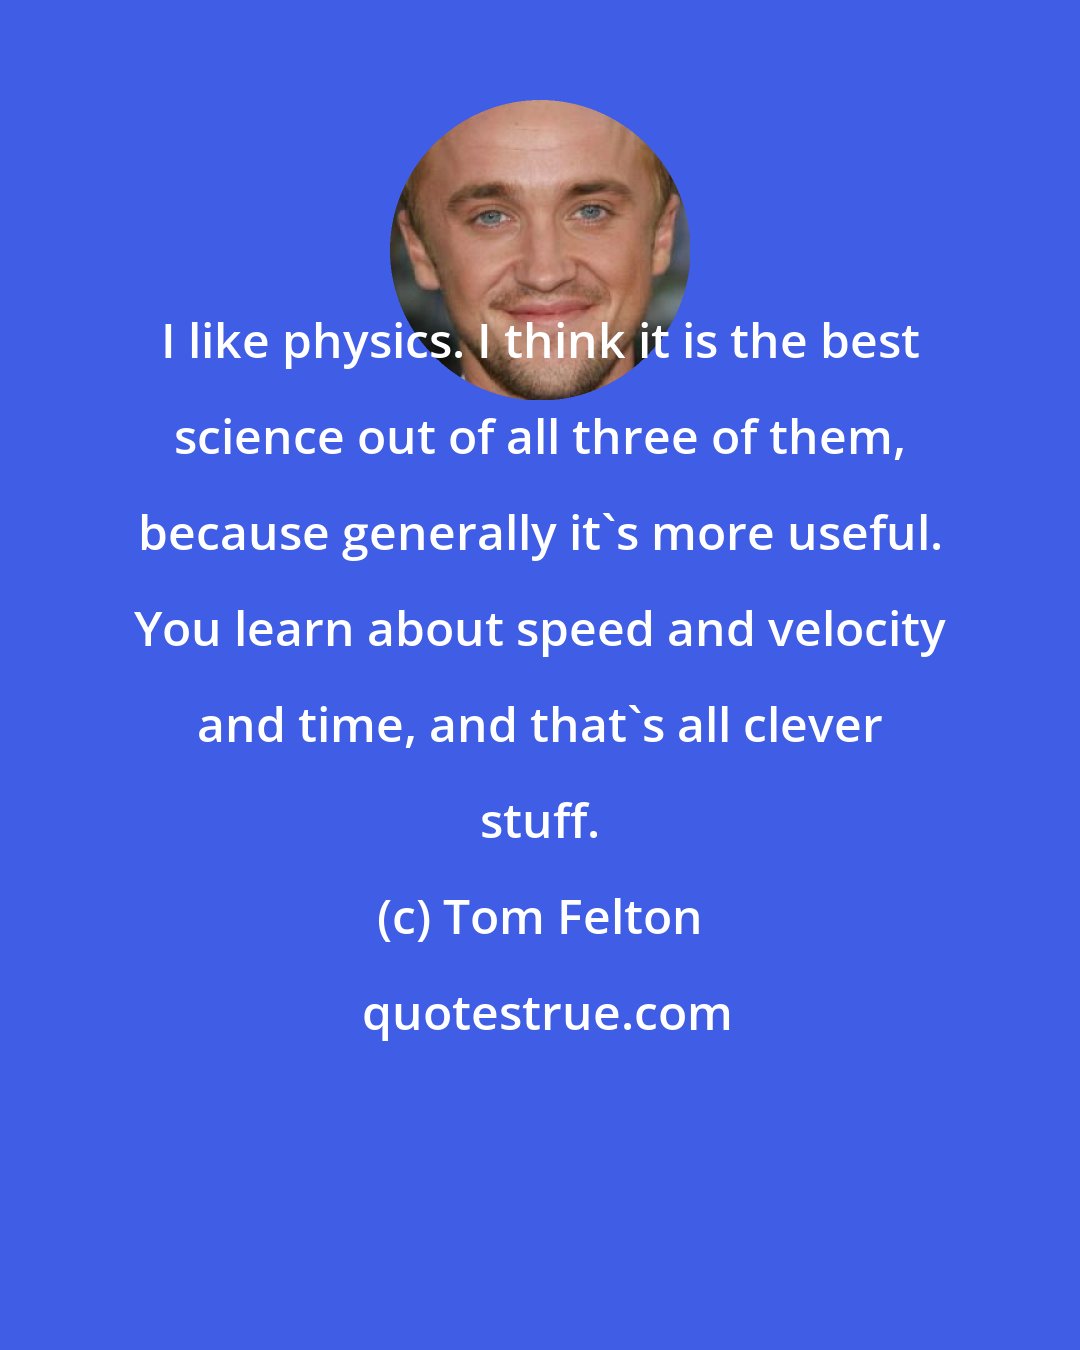 Tom Felton: I like physics. I think it is the best science out of all three of them, because generally it's more useful. You learn about speed and velocity and time, and that's all clever stuff.